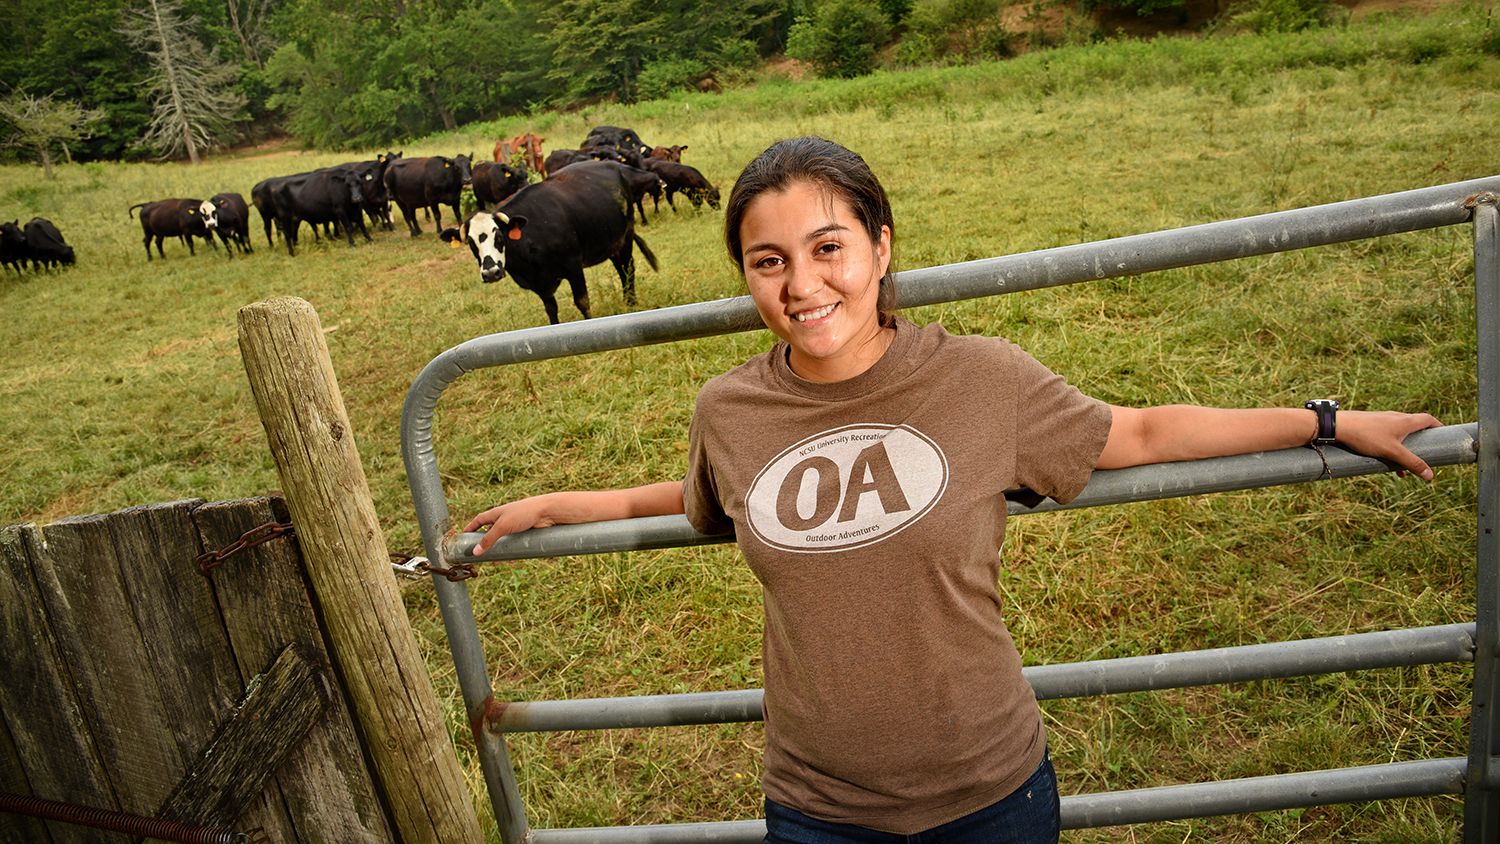 CALS student Selena Ibarra at Hickory Nut Farm in Buncombe County.